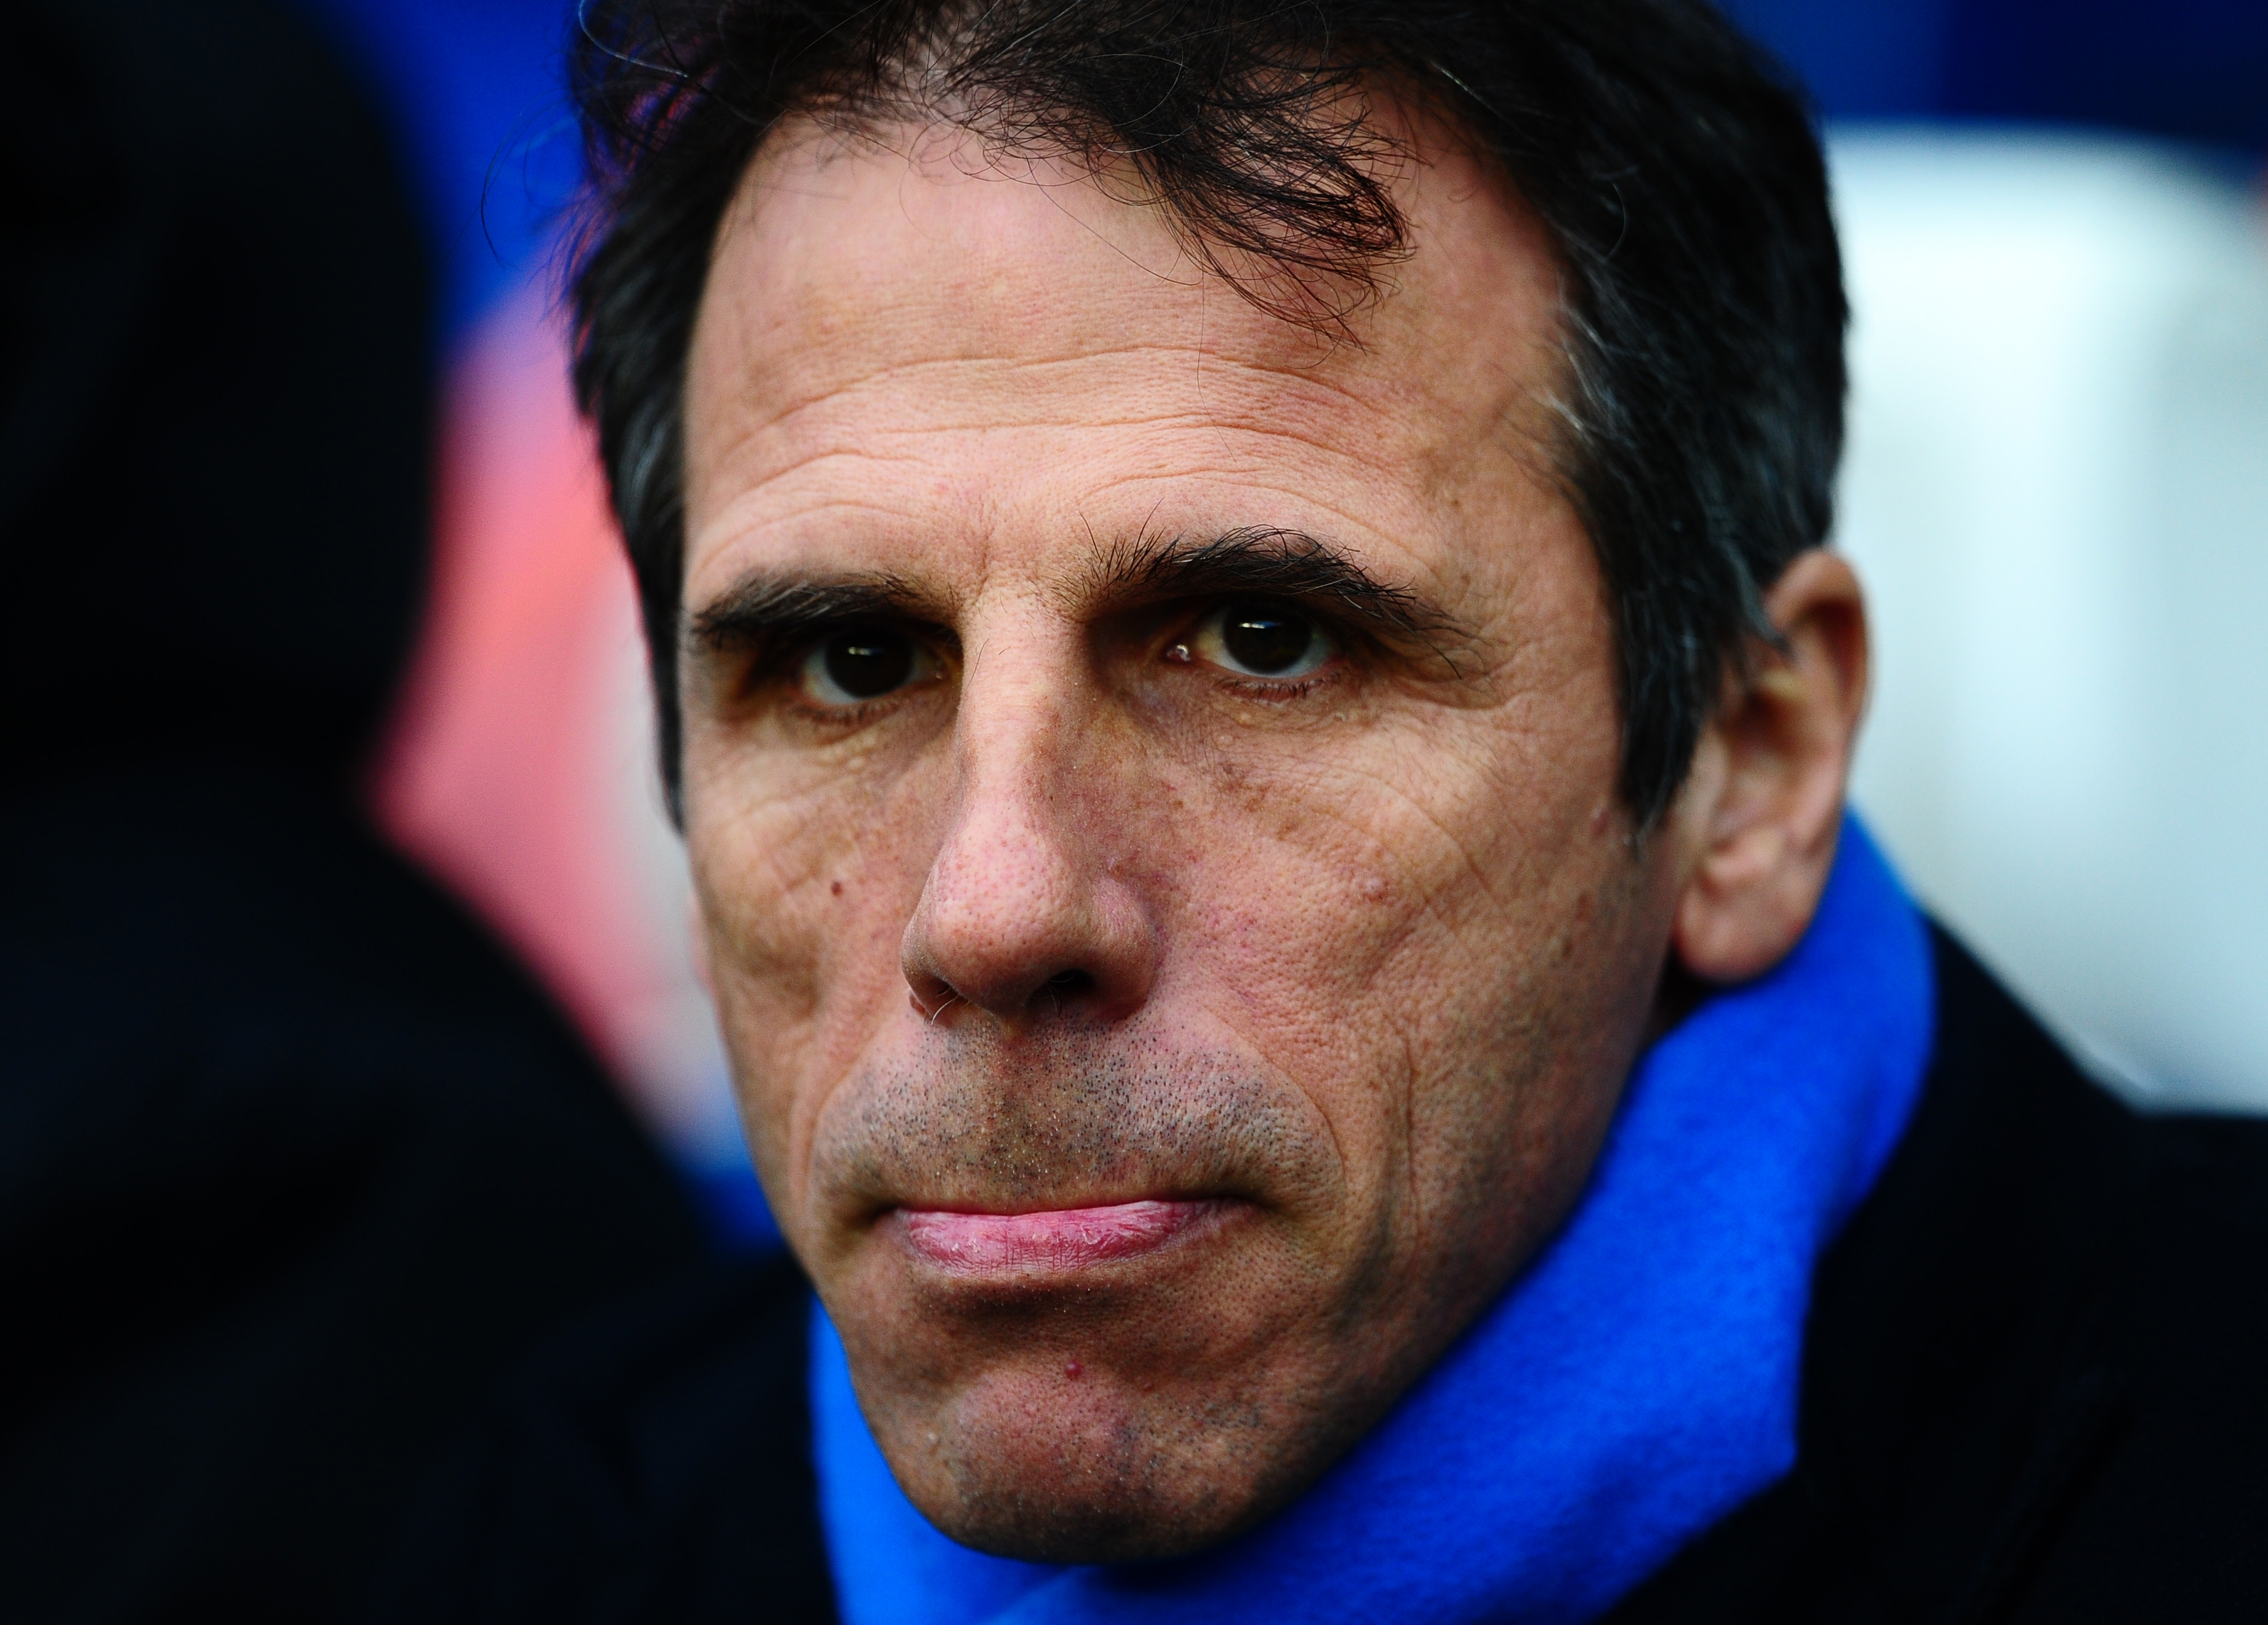 Ex-Napoli Forward Gianfranco Zola: “Inter Are A Mystery, Something Doesn’t Add Up”